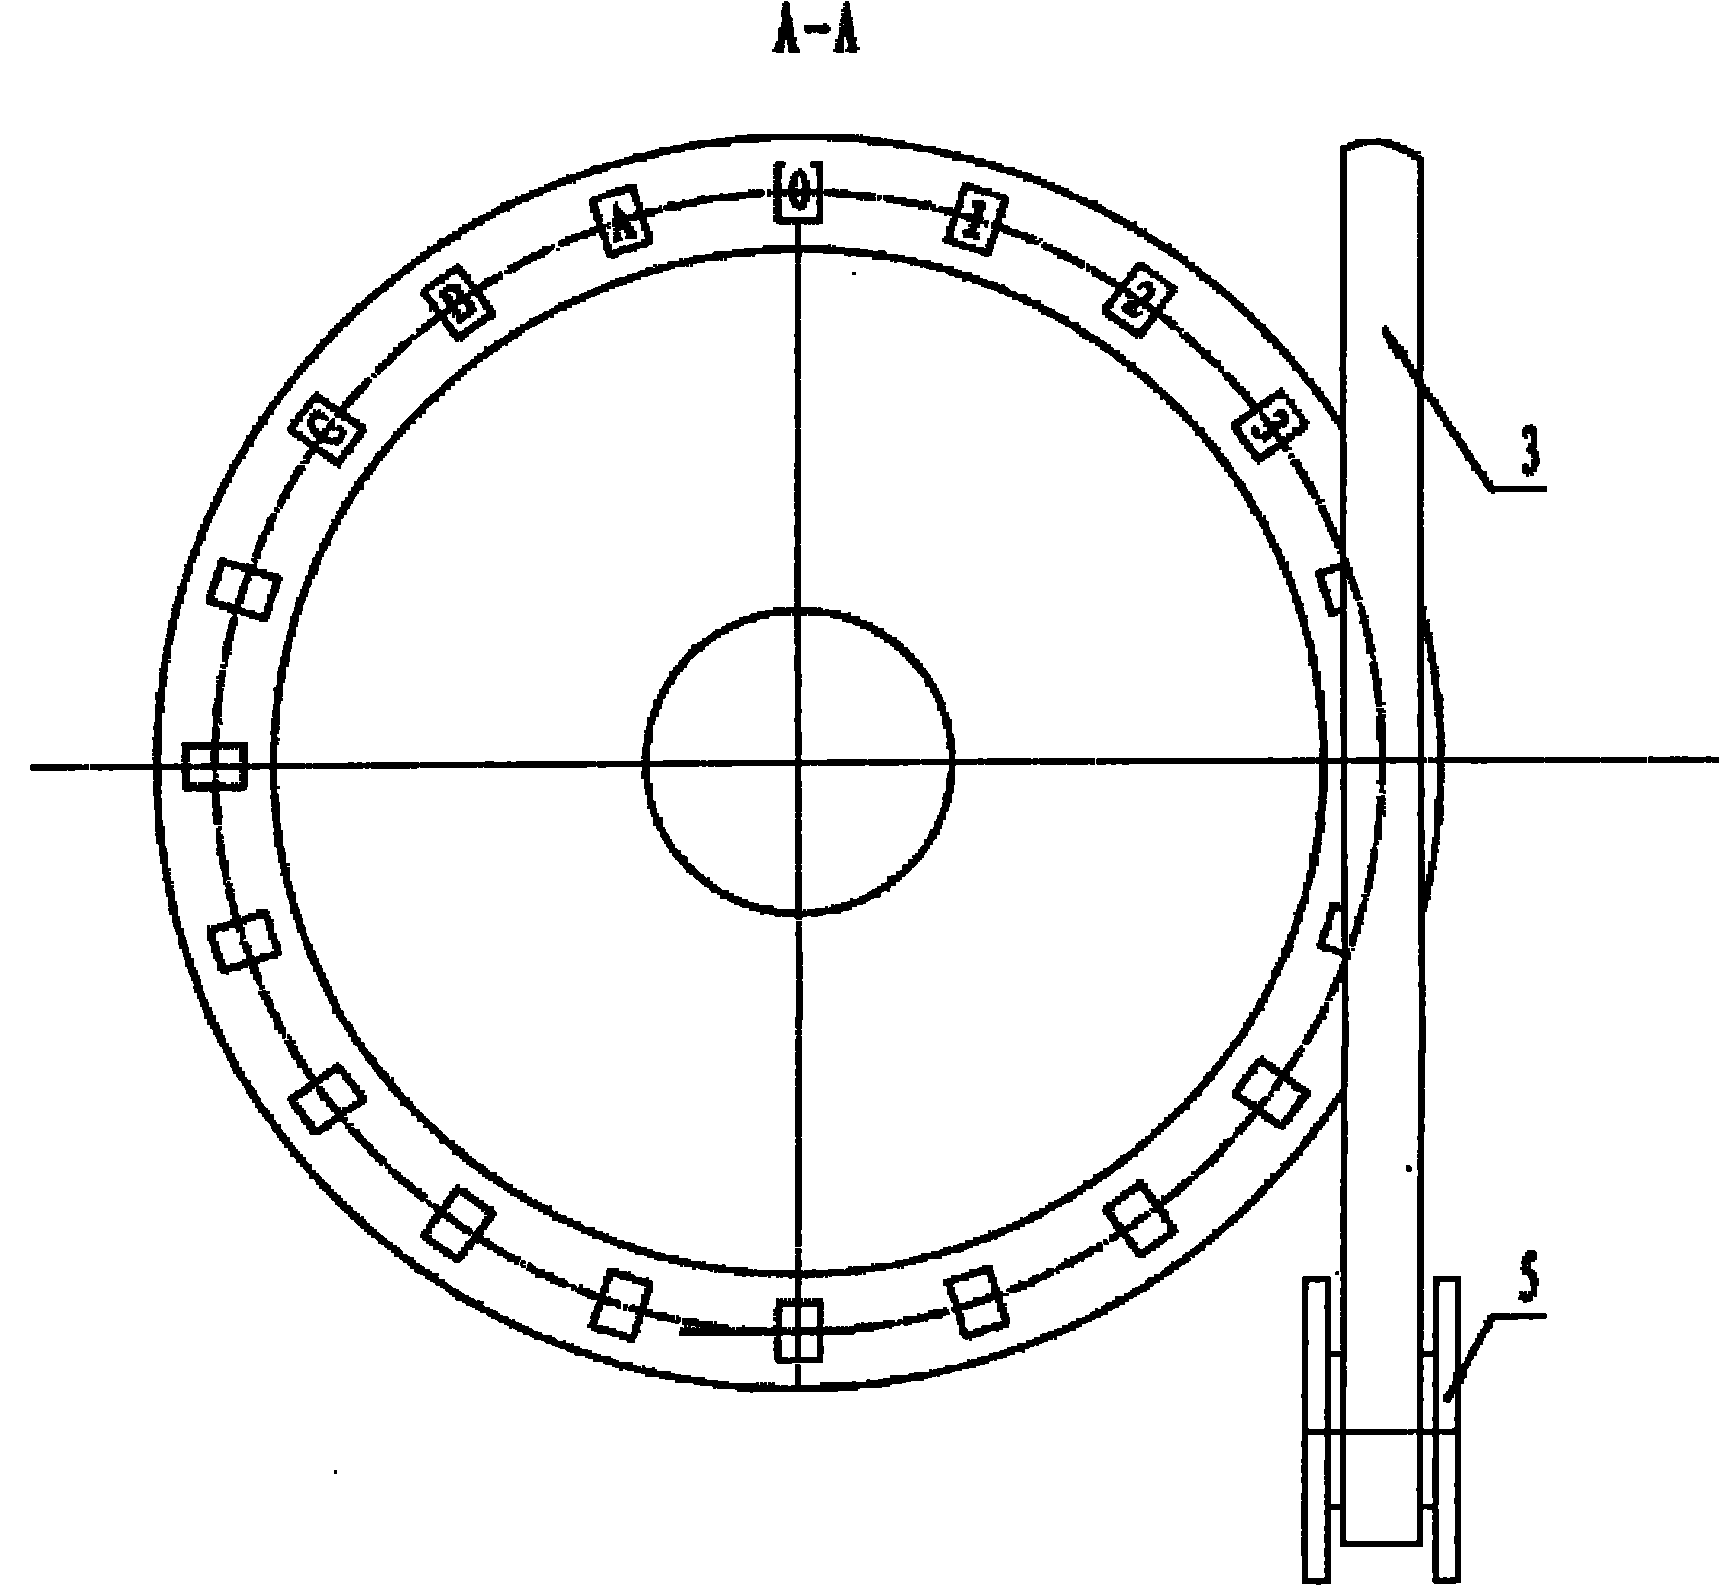 Continuous manufacturing method of arc-shaped lined radial radiating metal tag characters